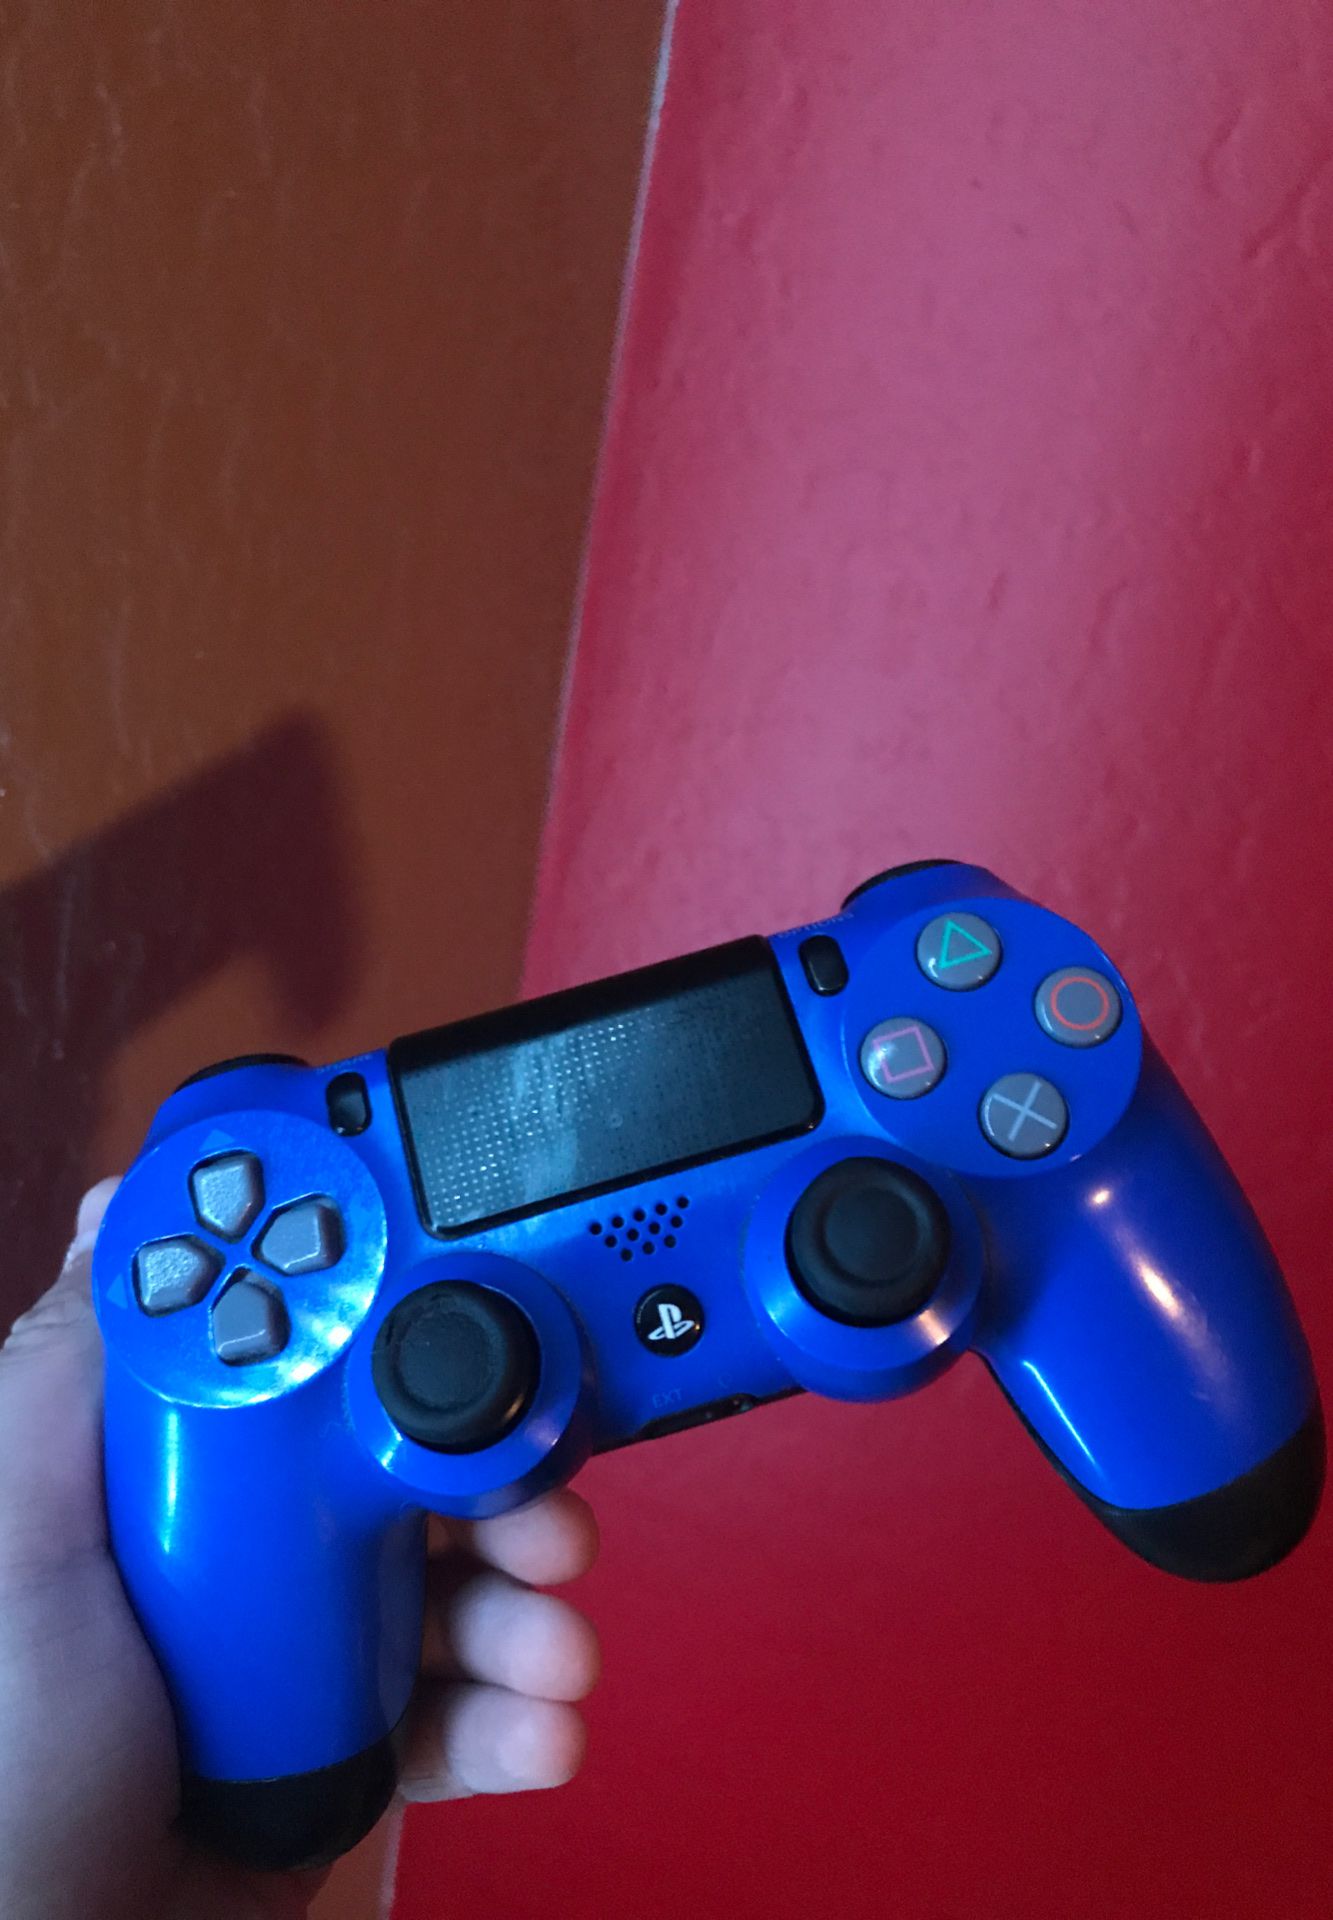 Blue and black ps4 controllers.